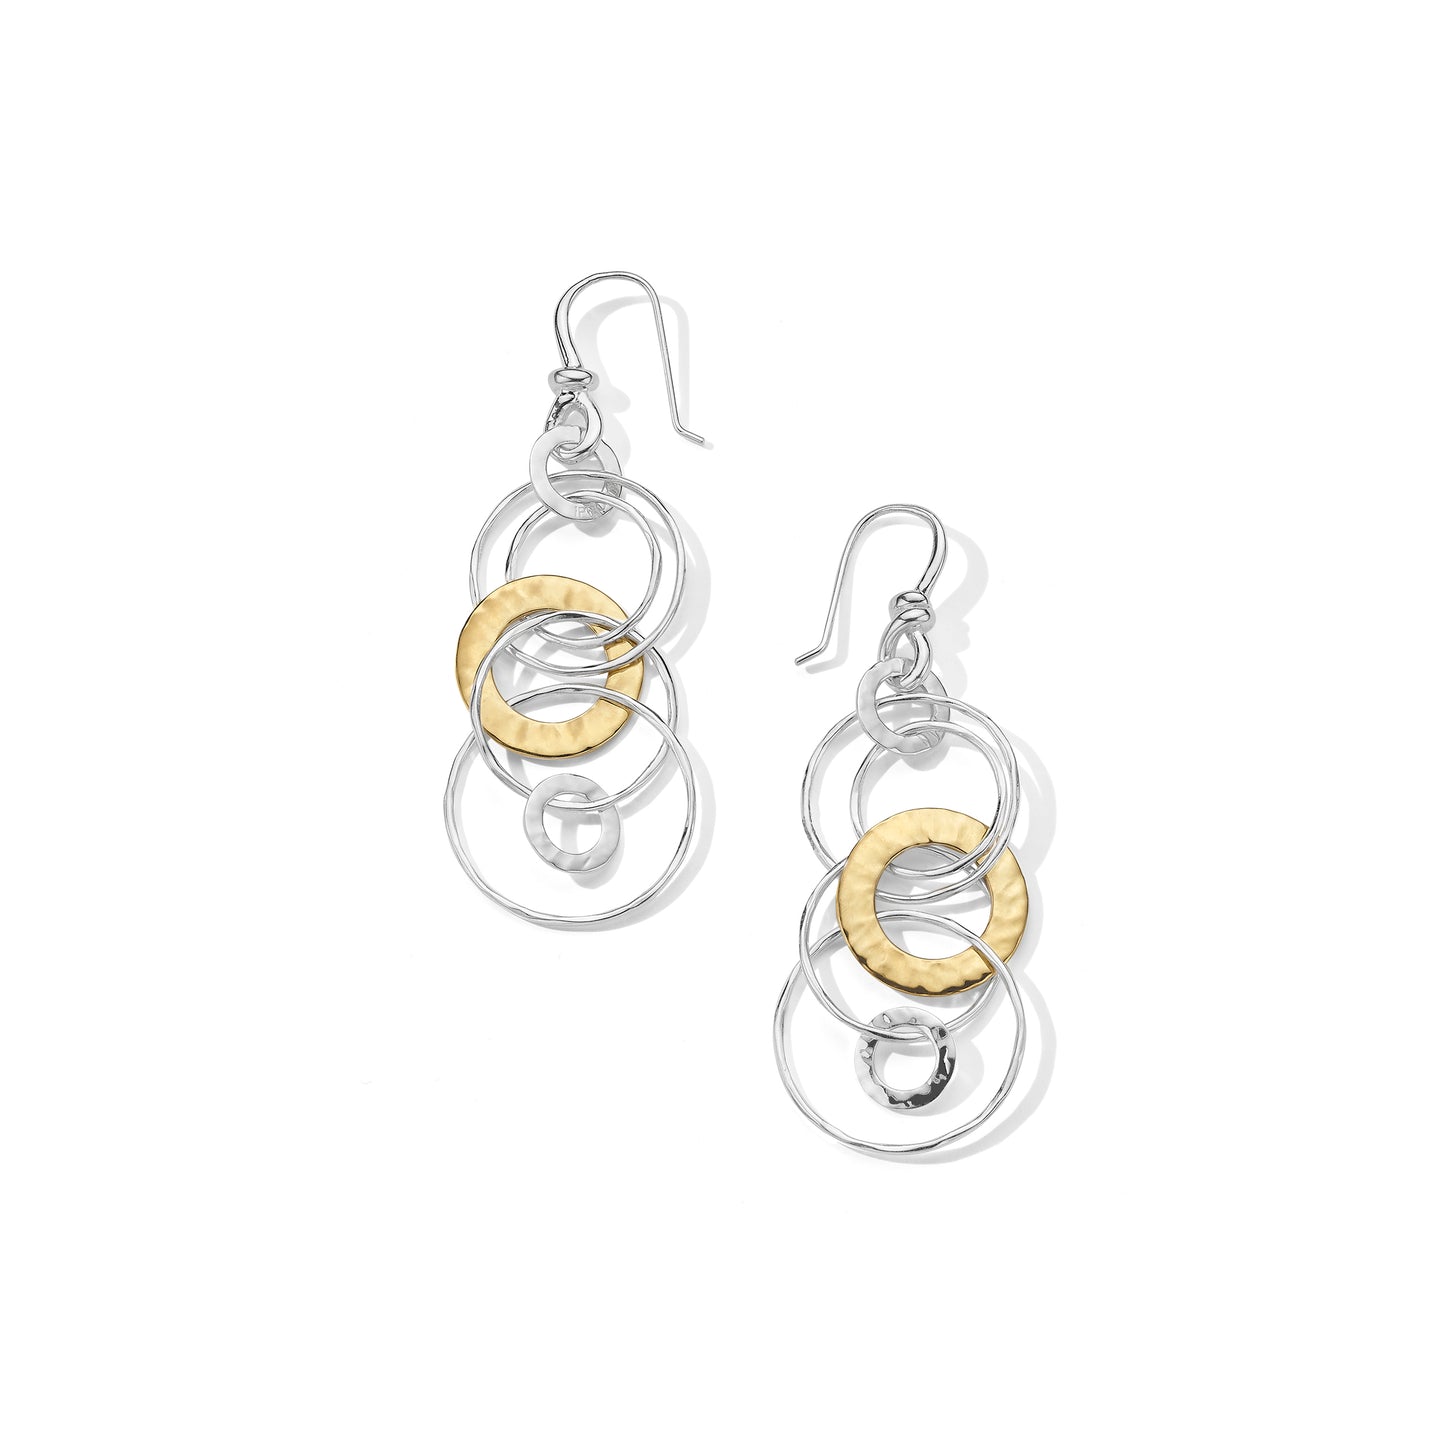 IPPOLITA Sterling Silver and 18K Yellow Gold Jet Set Dangle Earrings